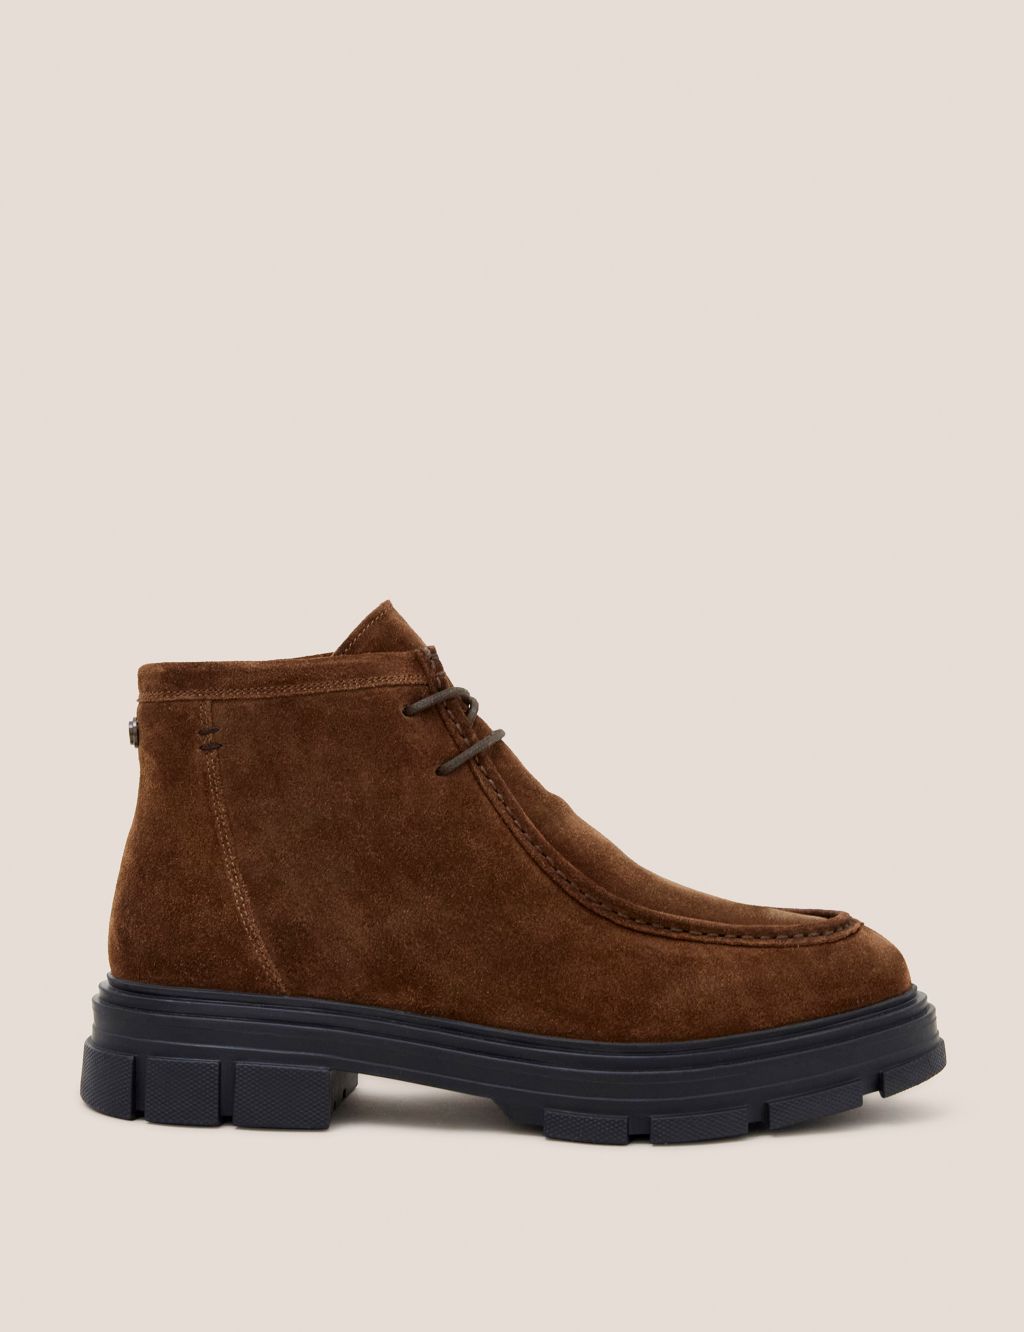 Suede Desert Boots image 2